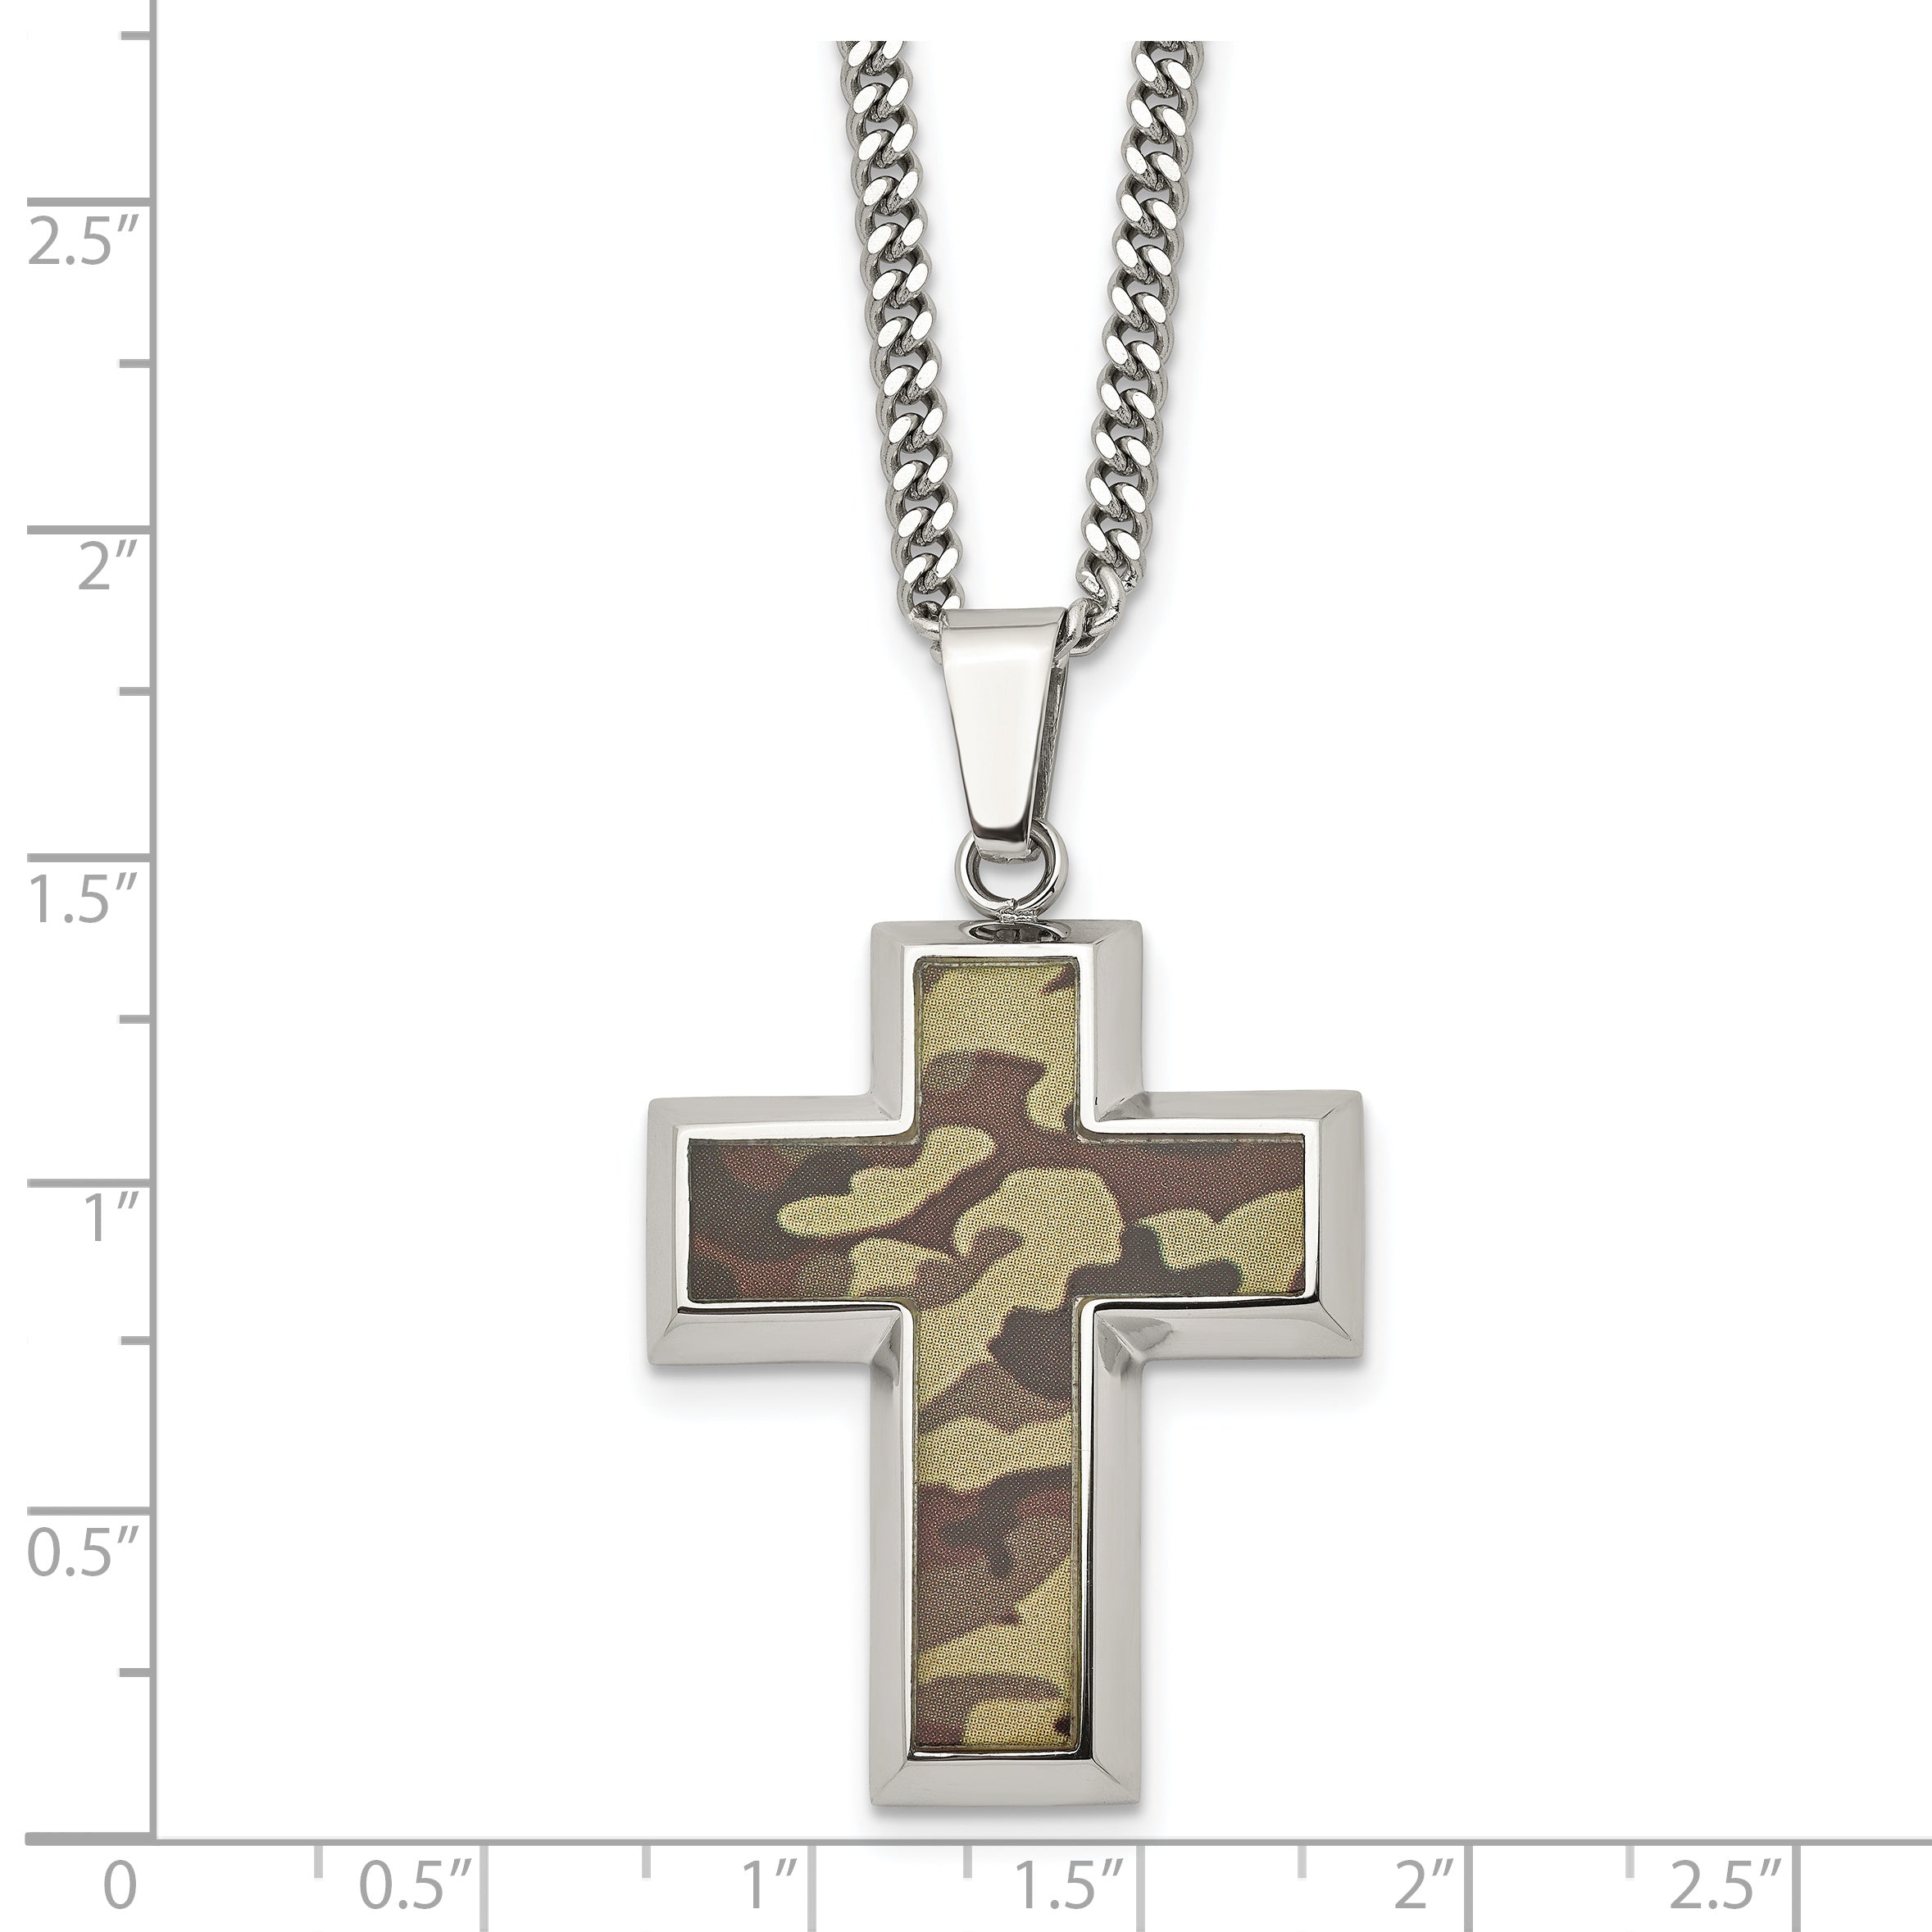 Chisel Stainless Steel Polished Printed Brown Camo Under Rubber Cross Pendant on a 22 inch Curb Chain Necklace